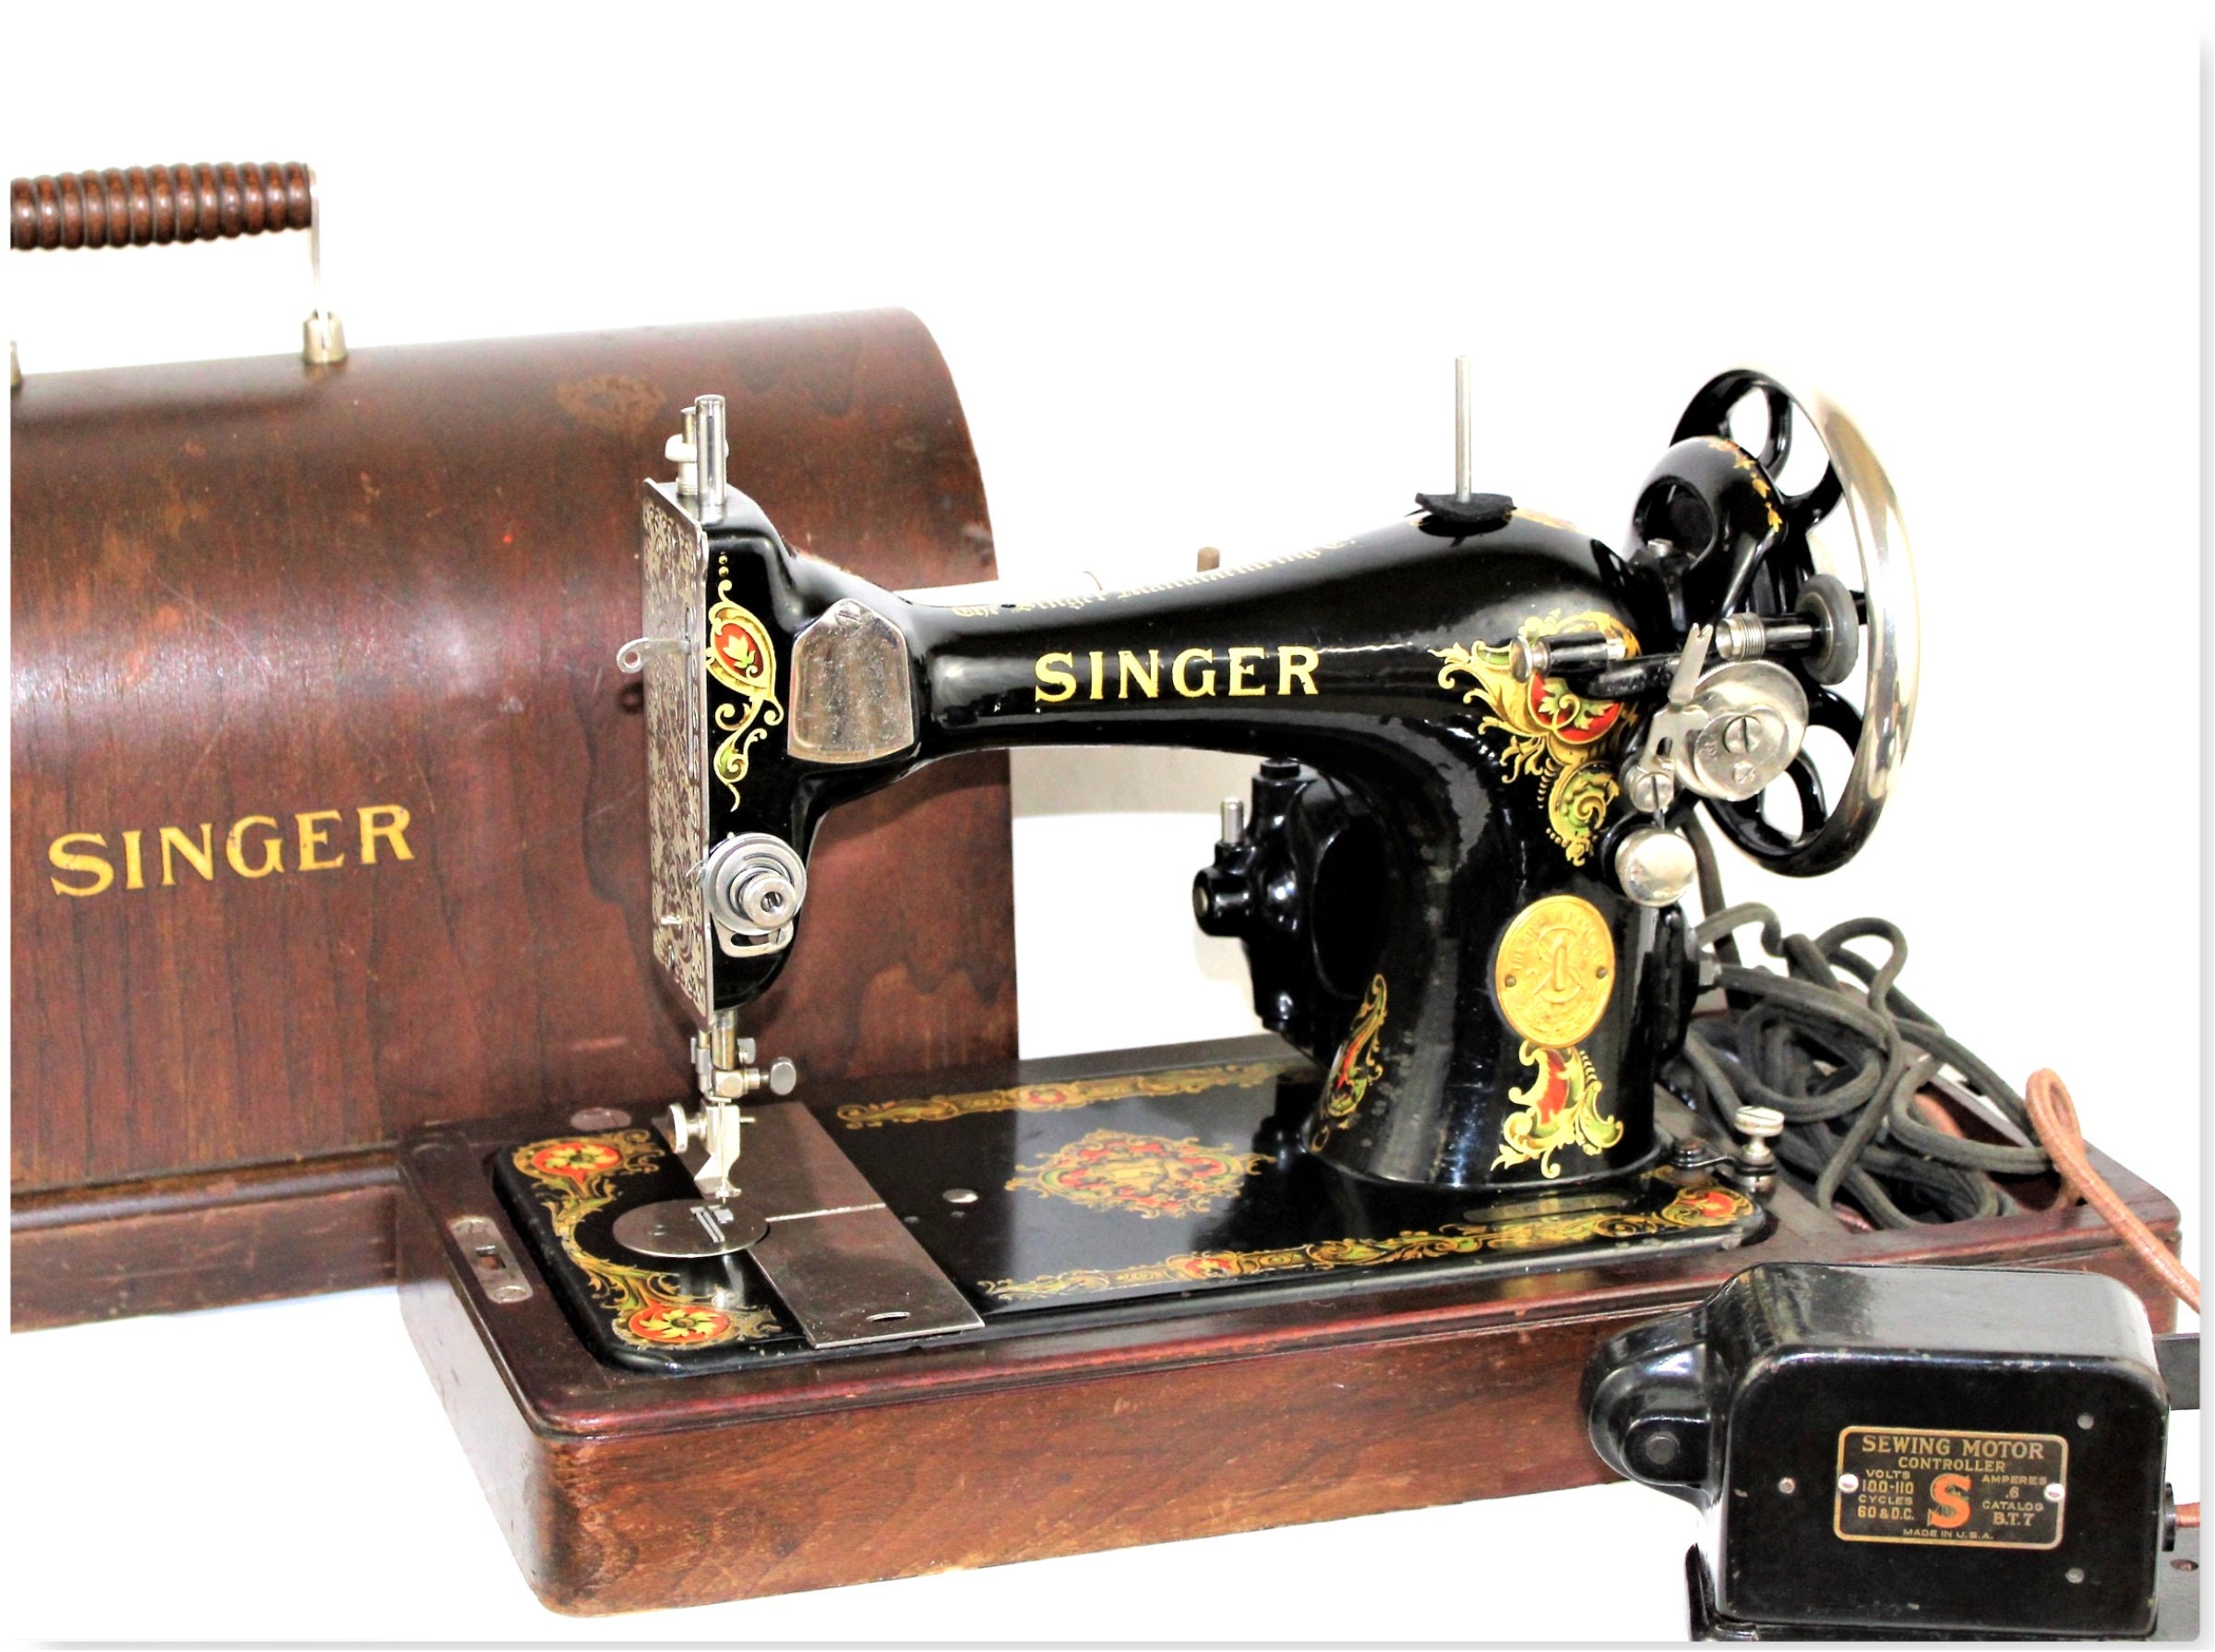 first-ever Signer sewing machine